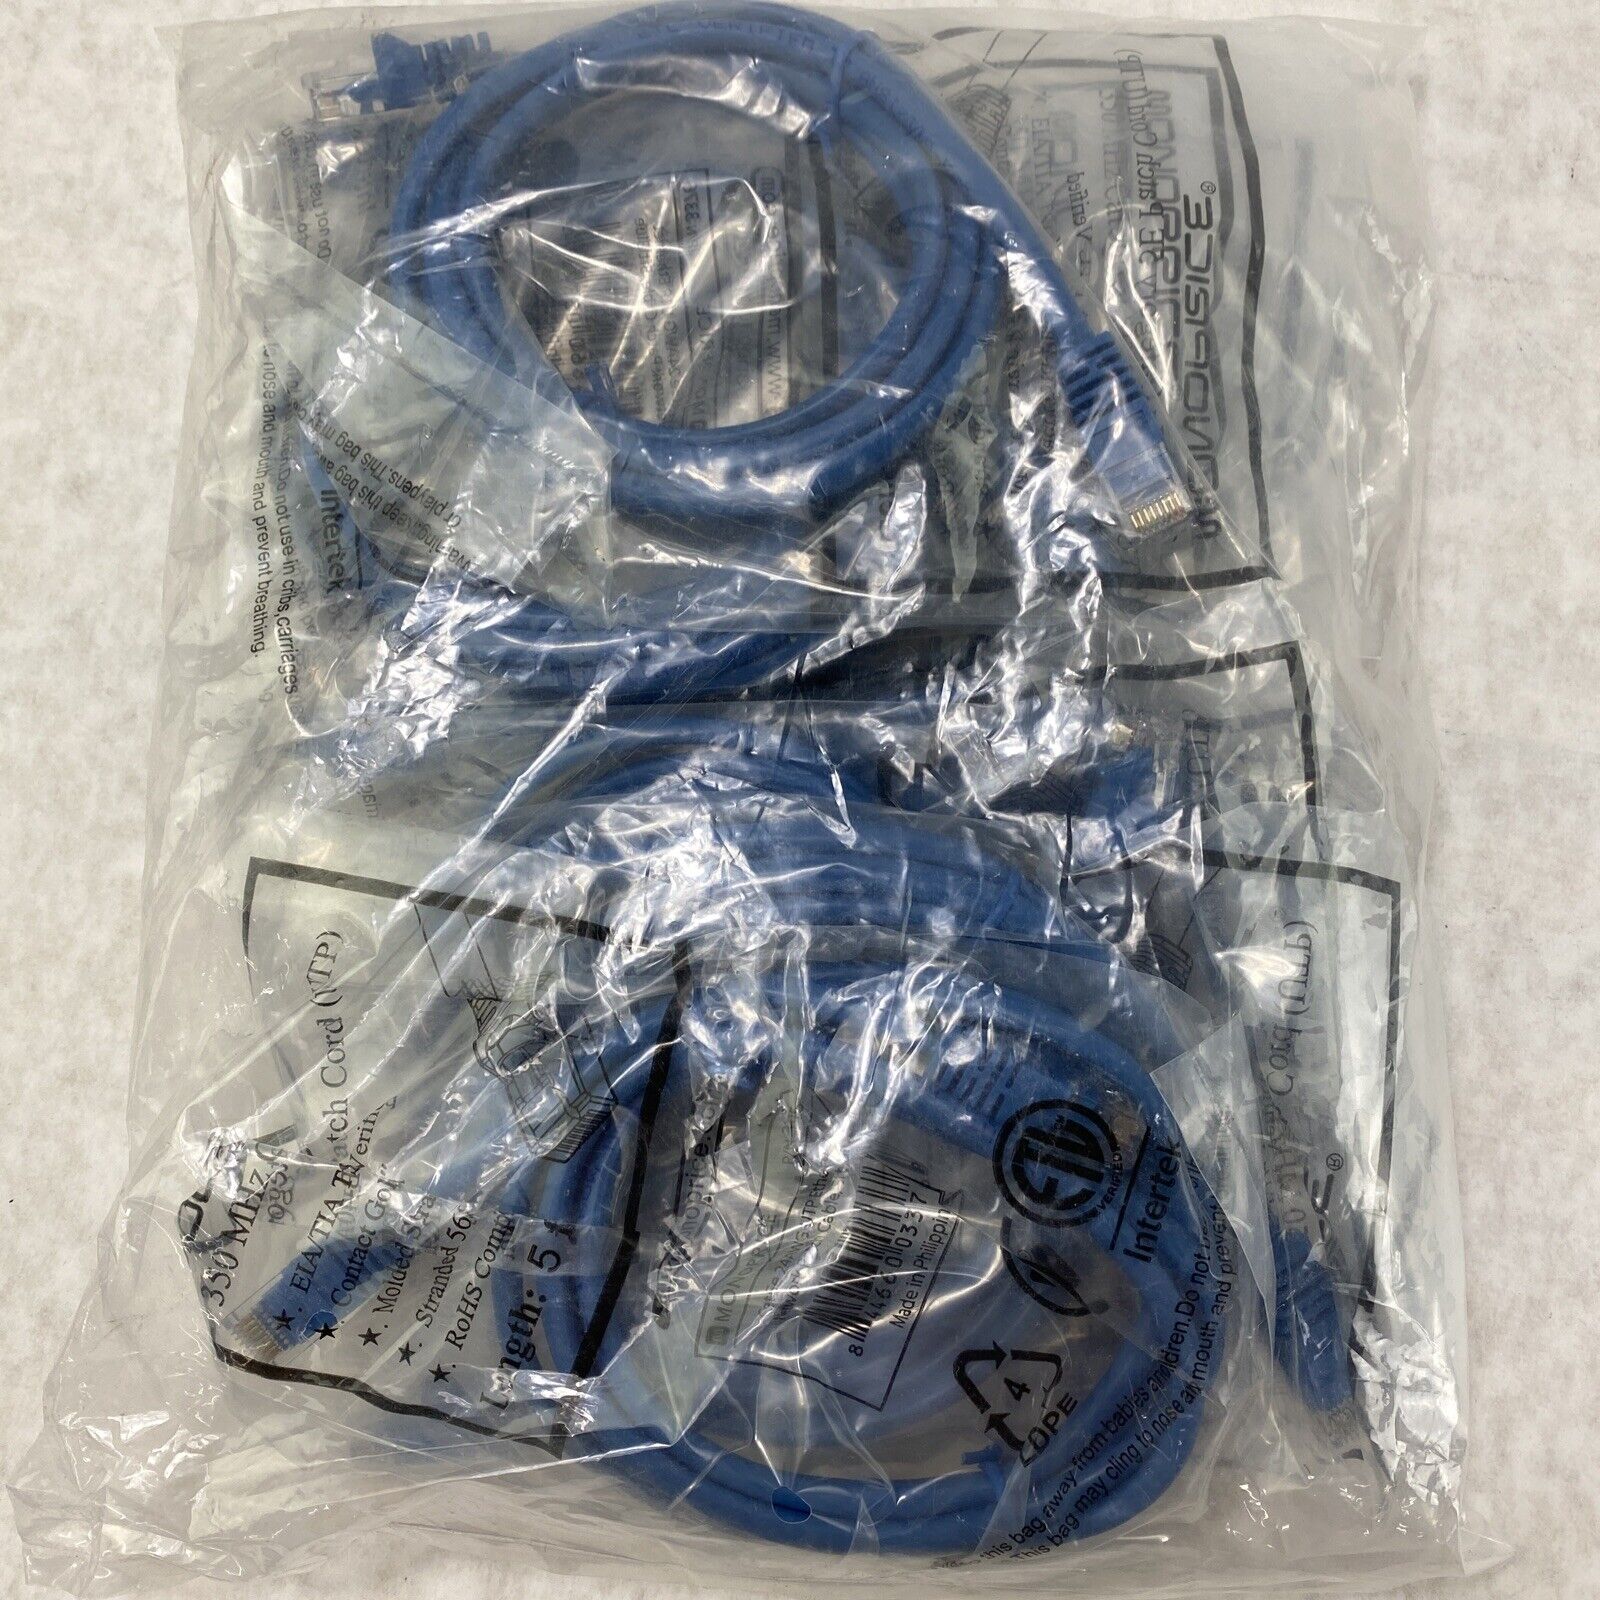 Lot of 10 Monoprice 5ft 24AWG Cat5e 350MHz UTP Ethernet network cables Blue